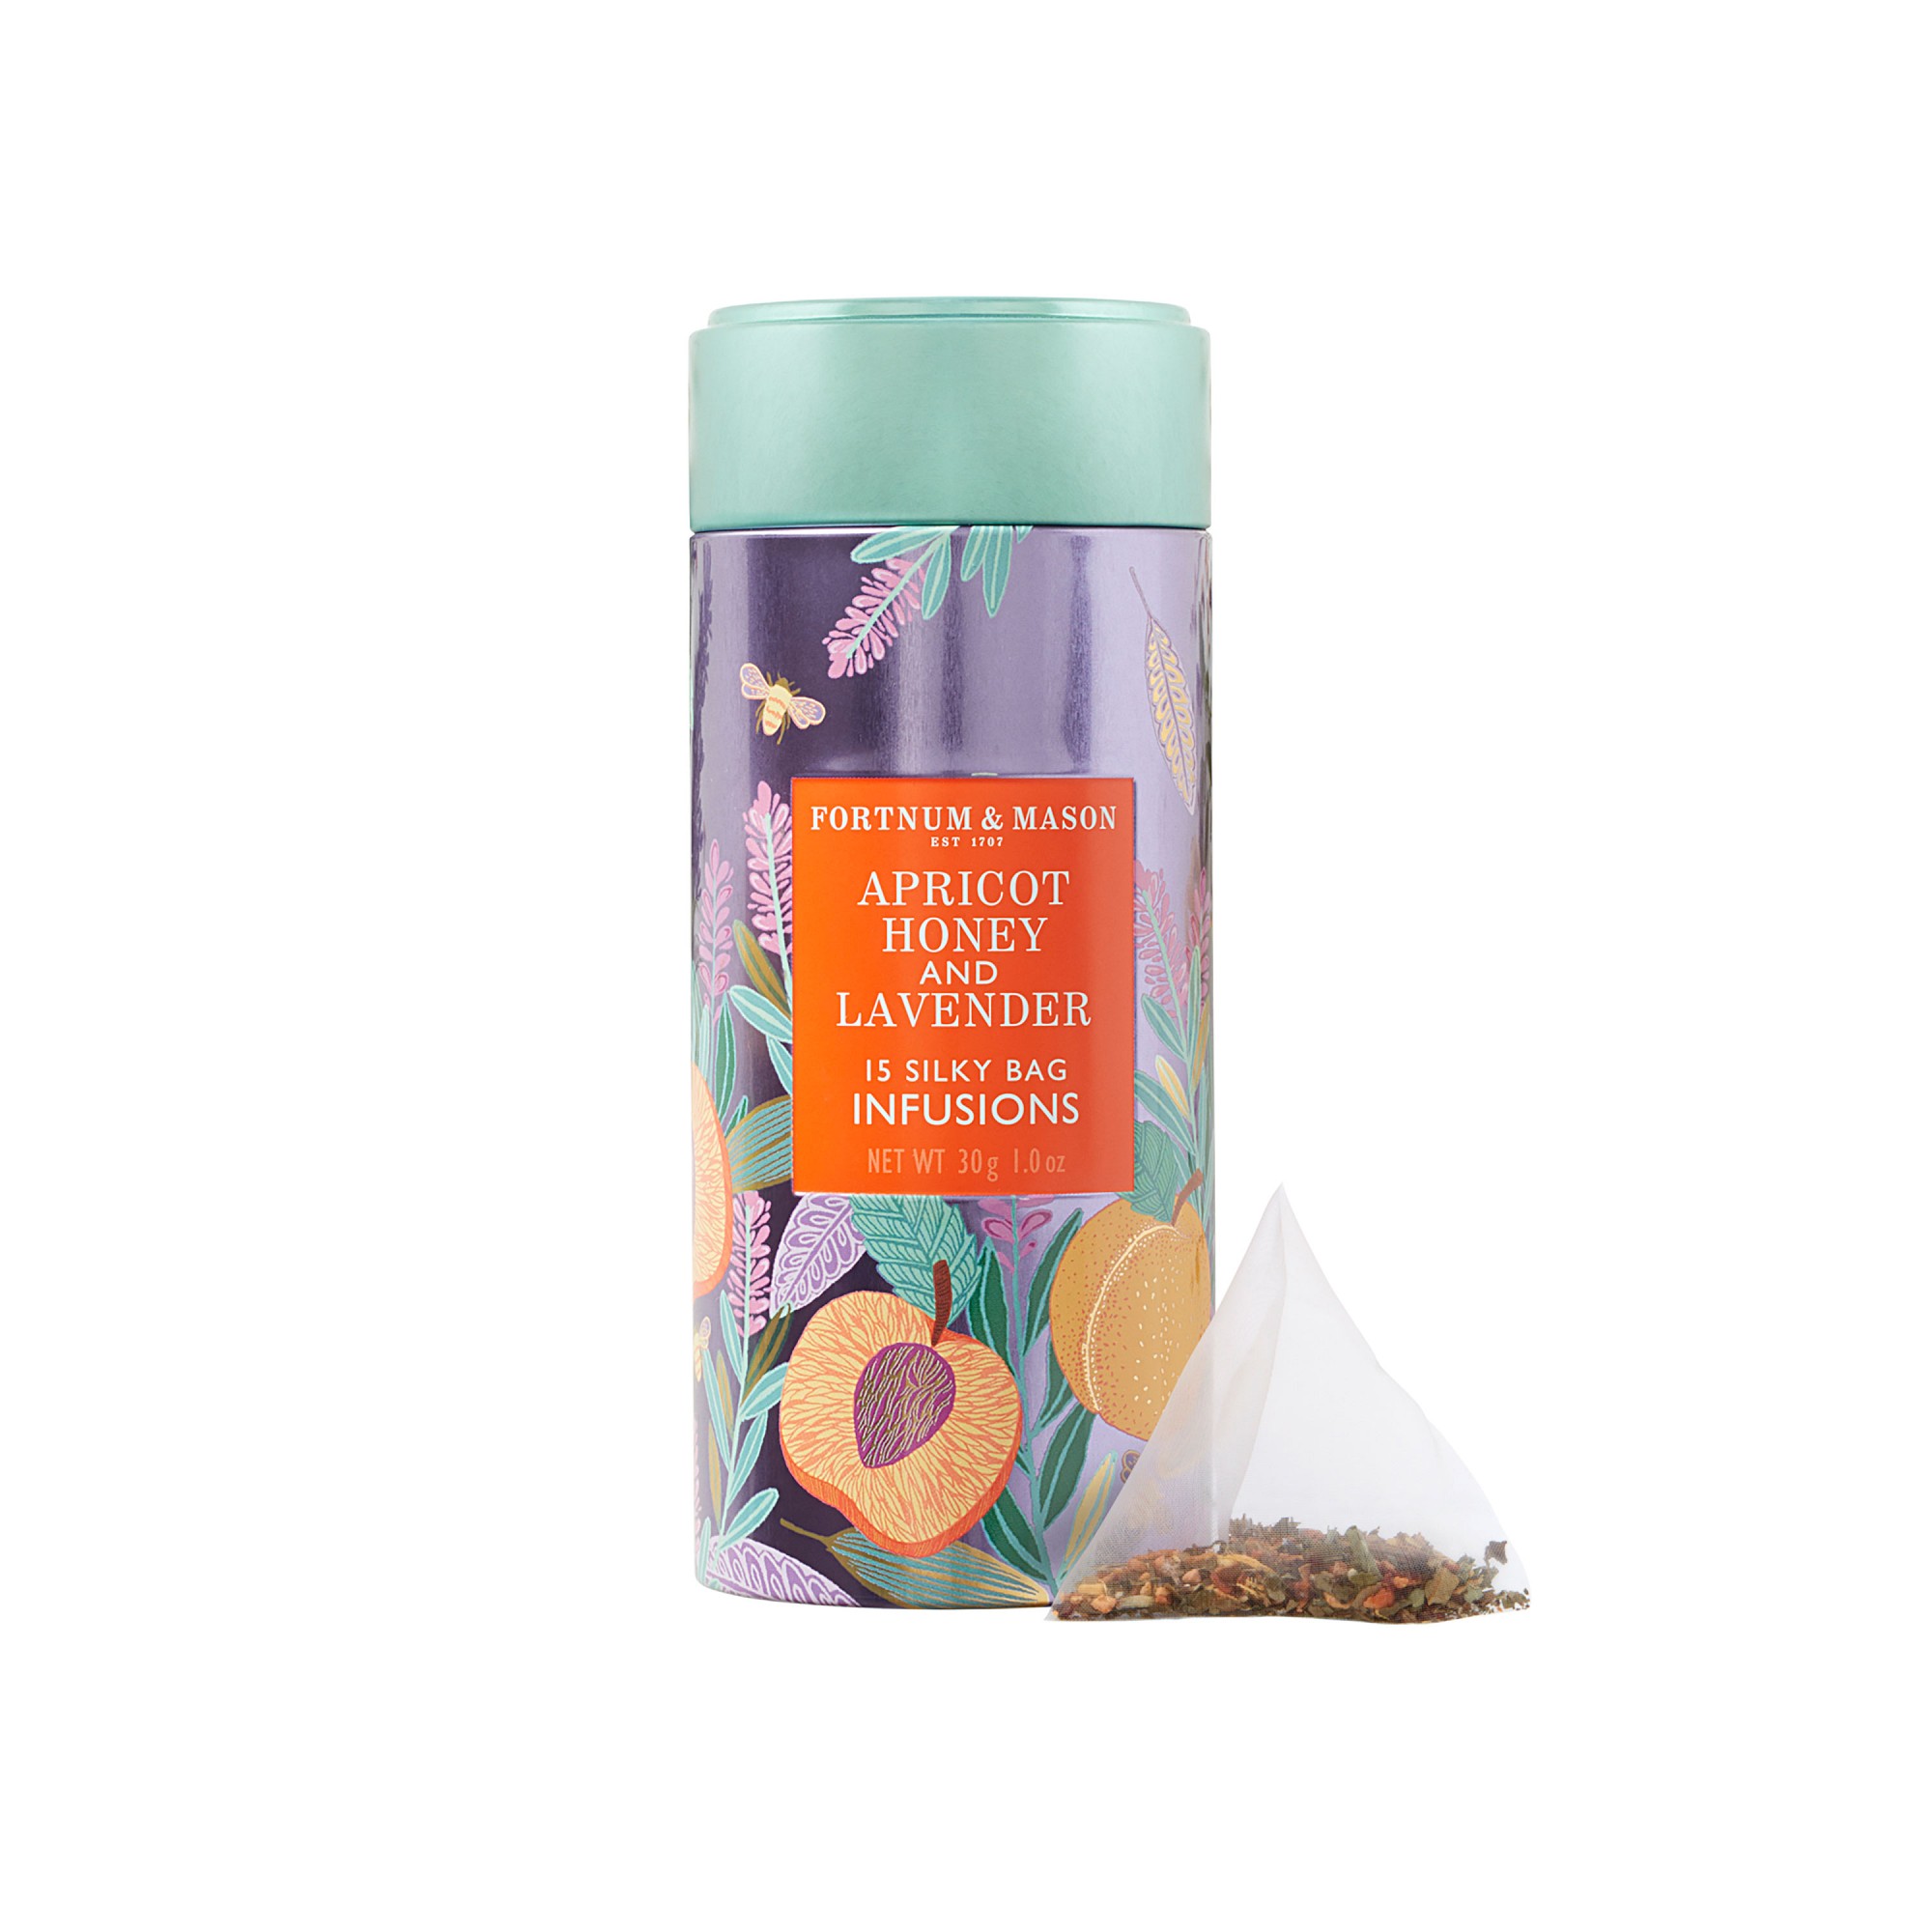 Fortnum & Mason Apricot Honey and Lavender Infusion Tea Bags, Set of 15